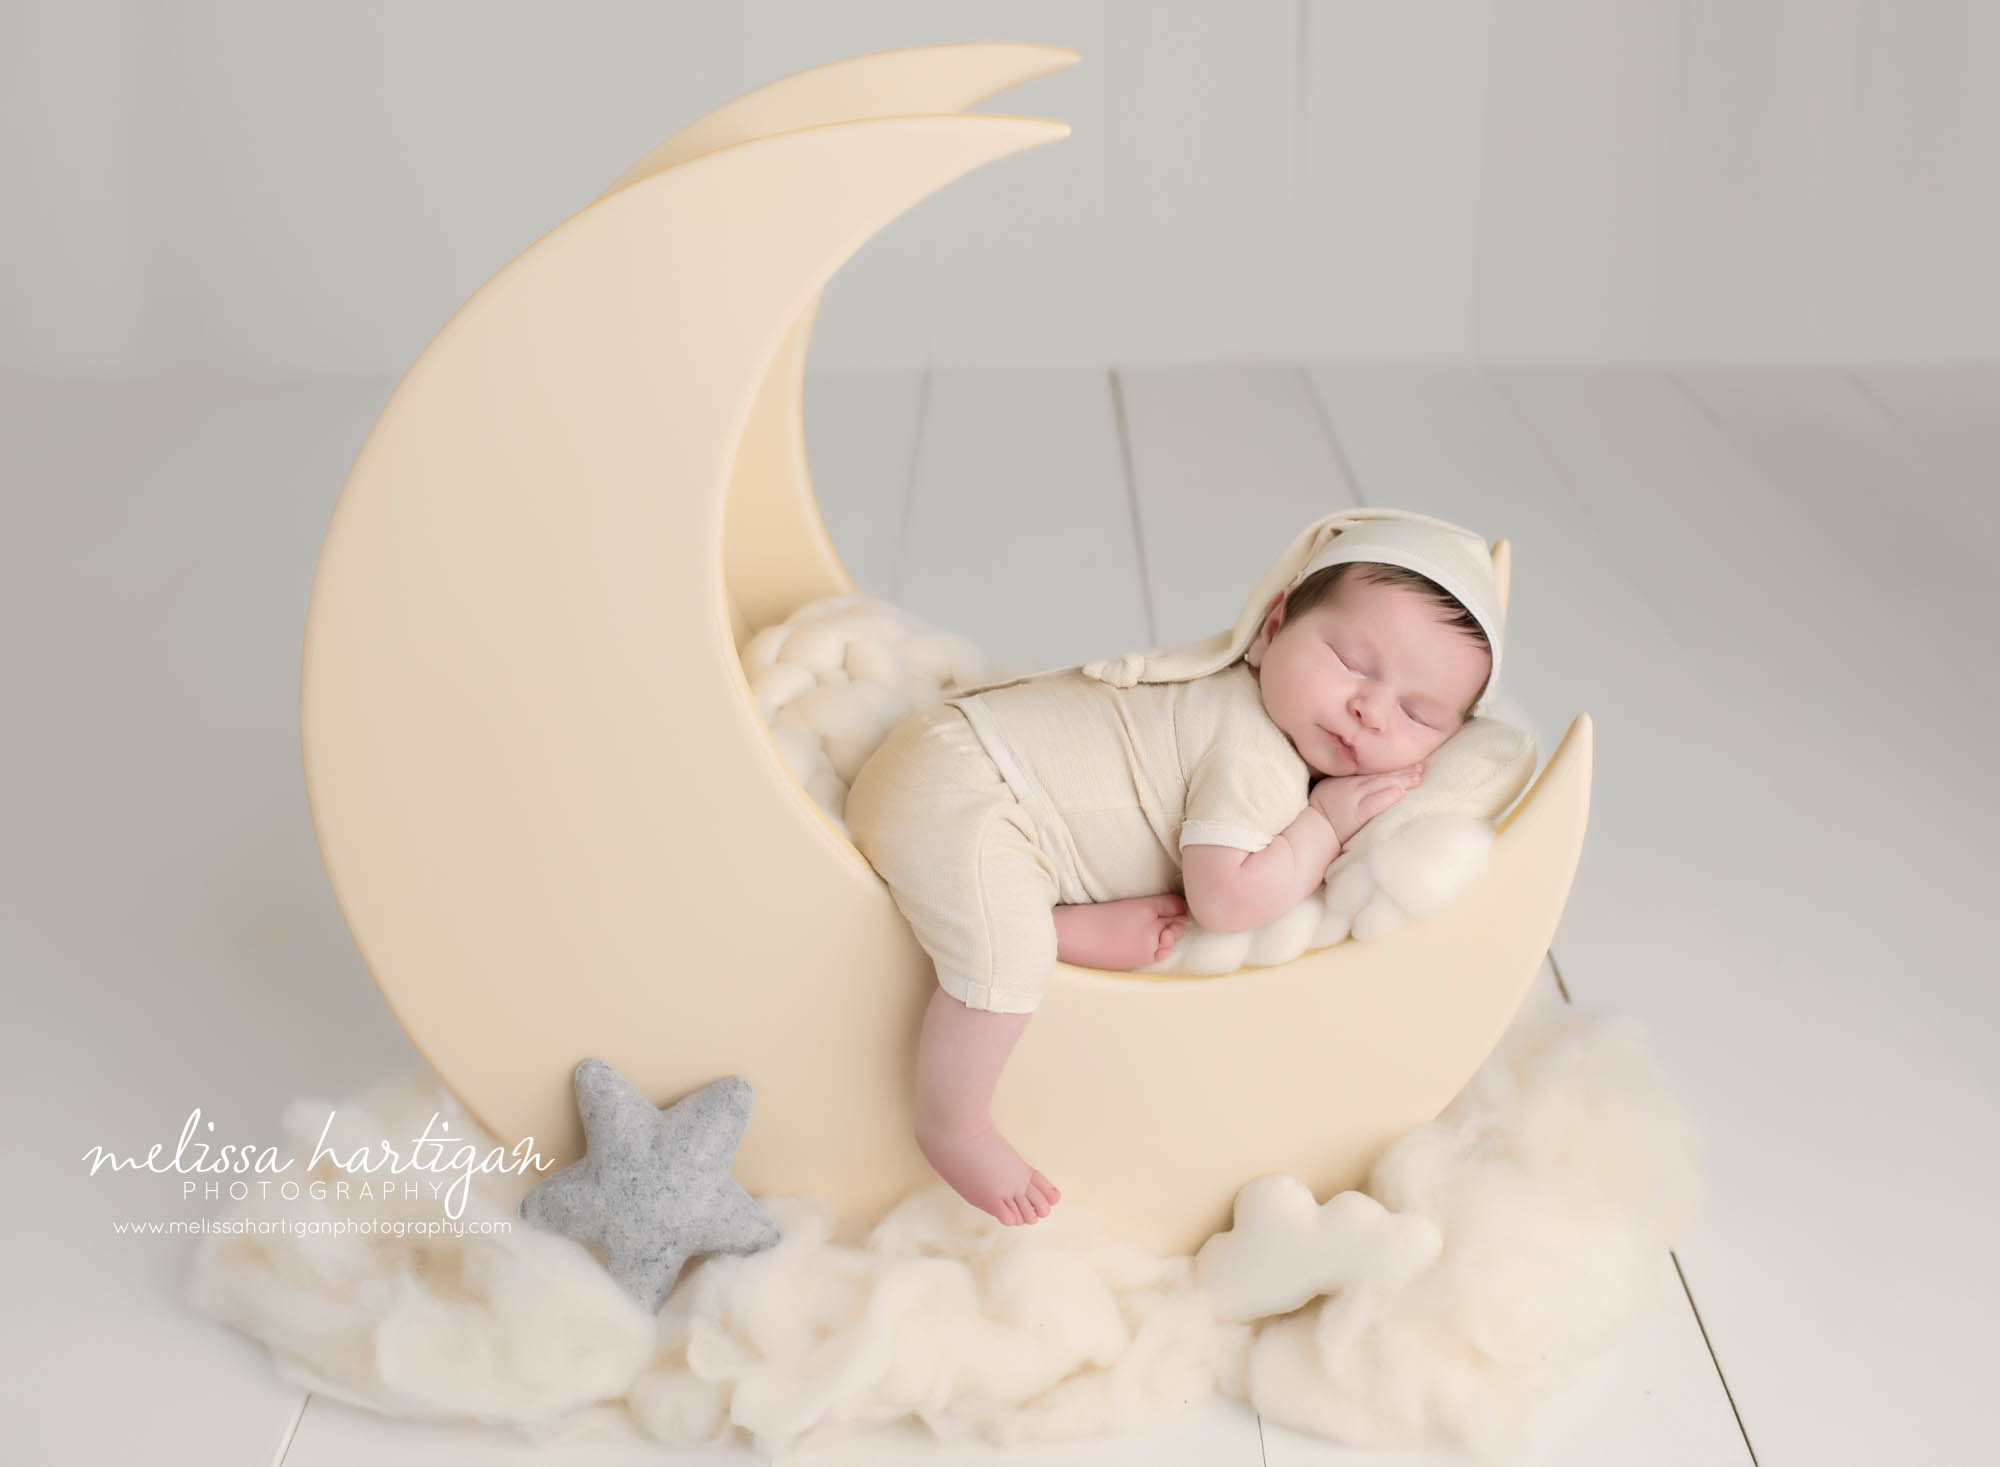 newborn baby boy sleeping on wooden moon prop posed newborn photography session in CT